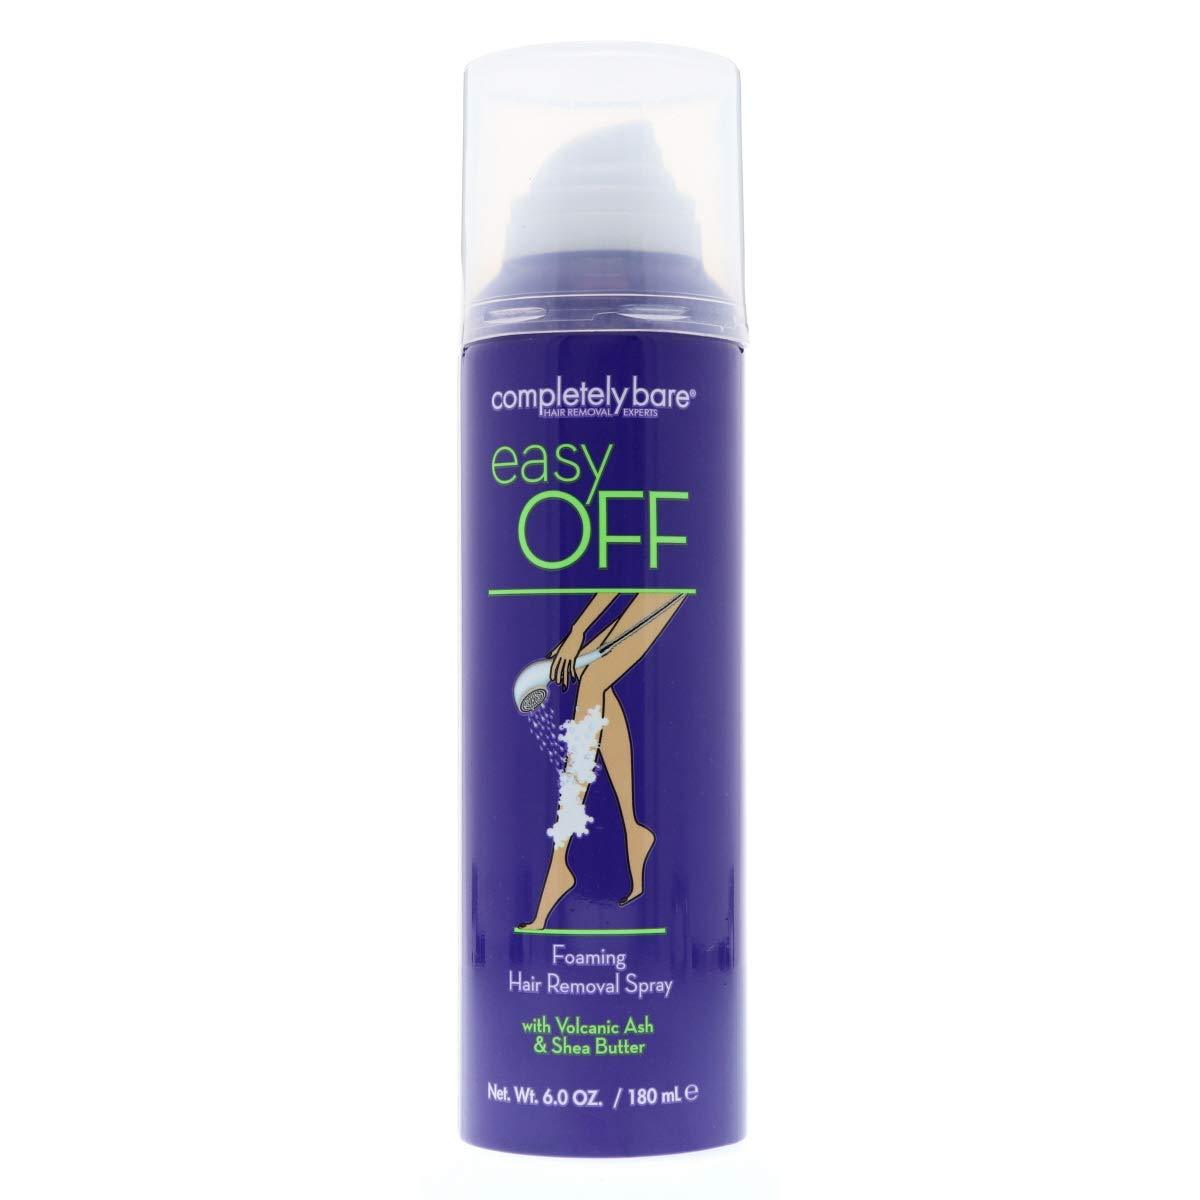 4th Ave Market: Completely Bare Easy Off Foaming Fine Hair Removal Spray 6oz